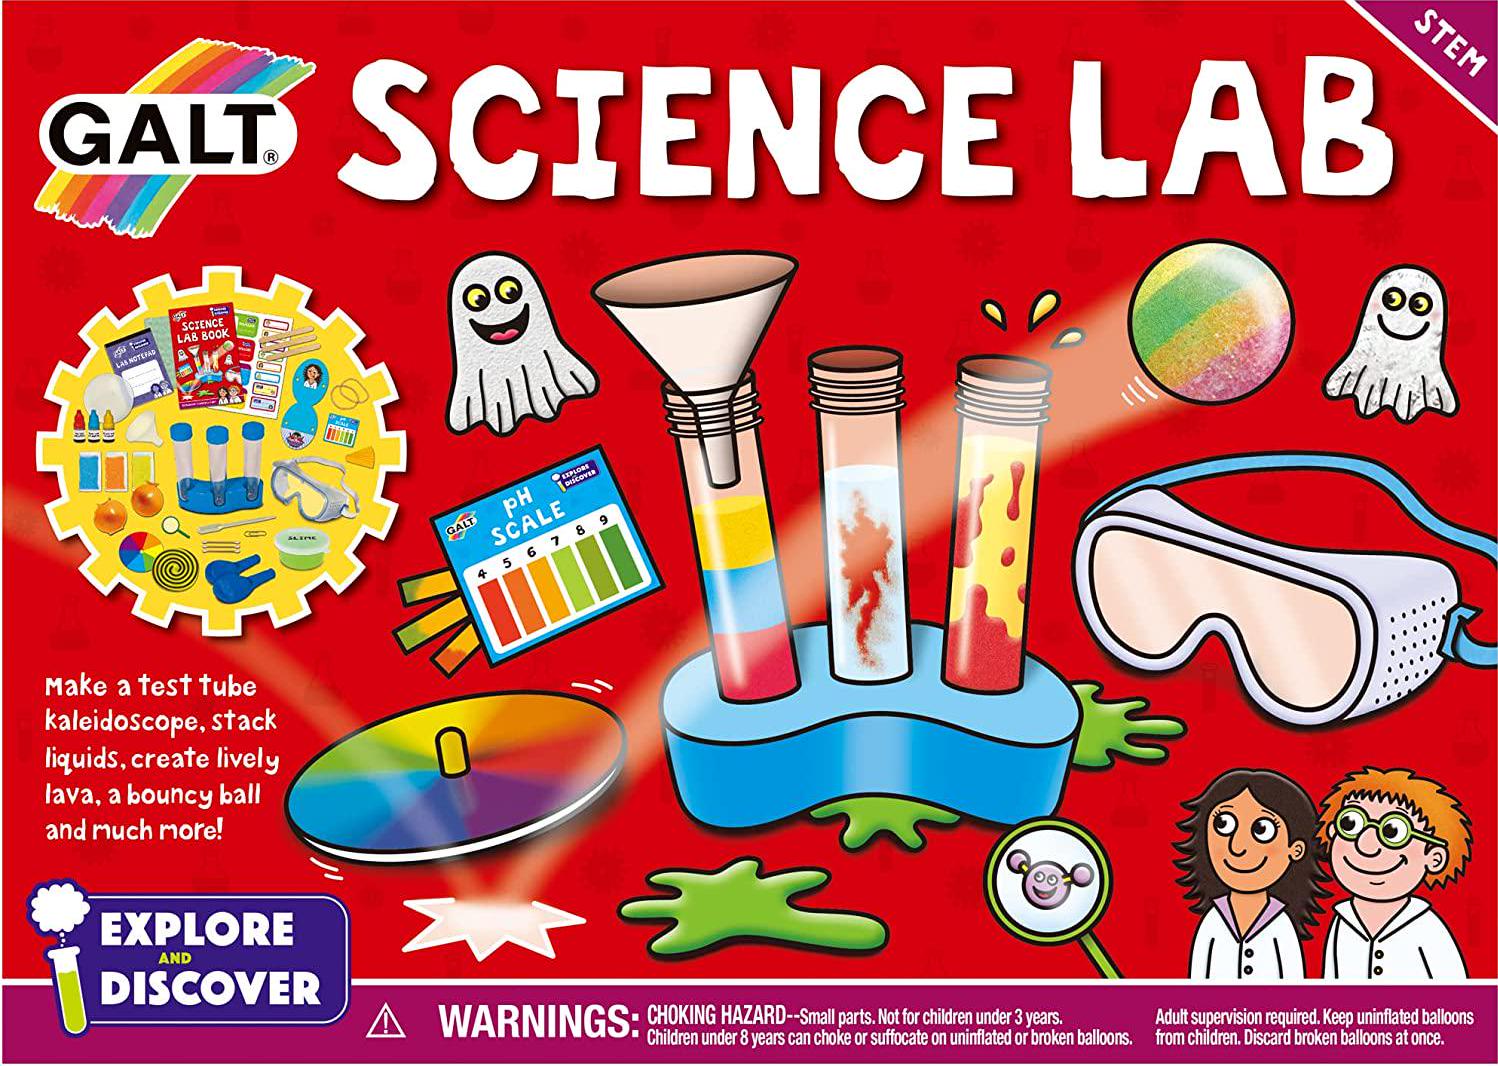 Galt, Galt Toys, Science Lab, Science Kit for Kids, Ages 6 Years Plus